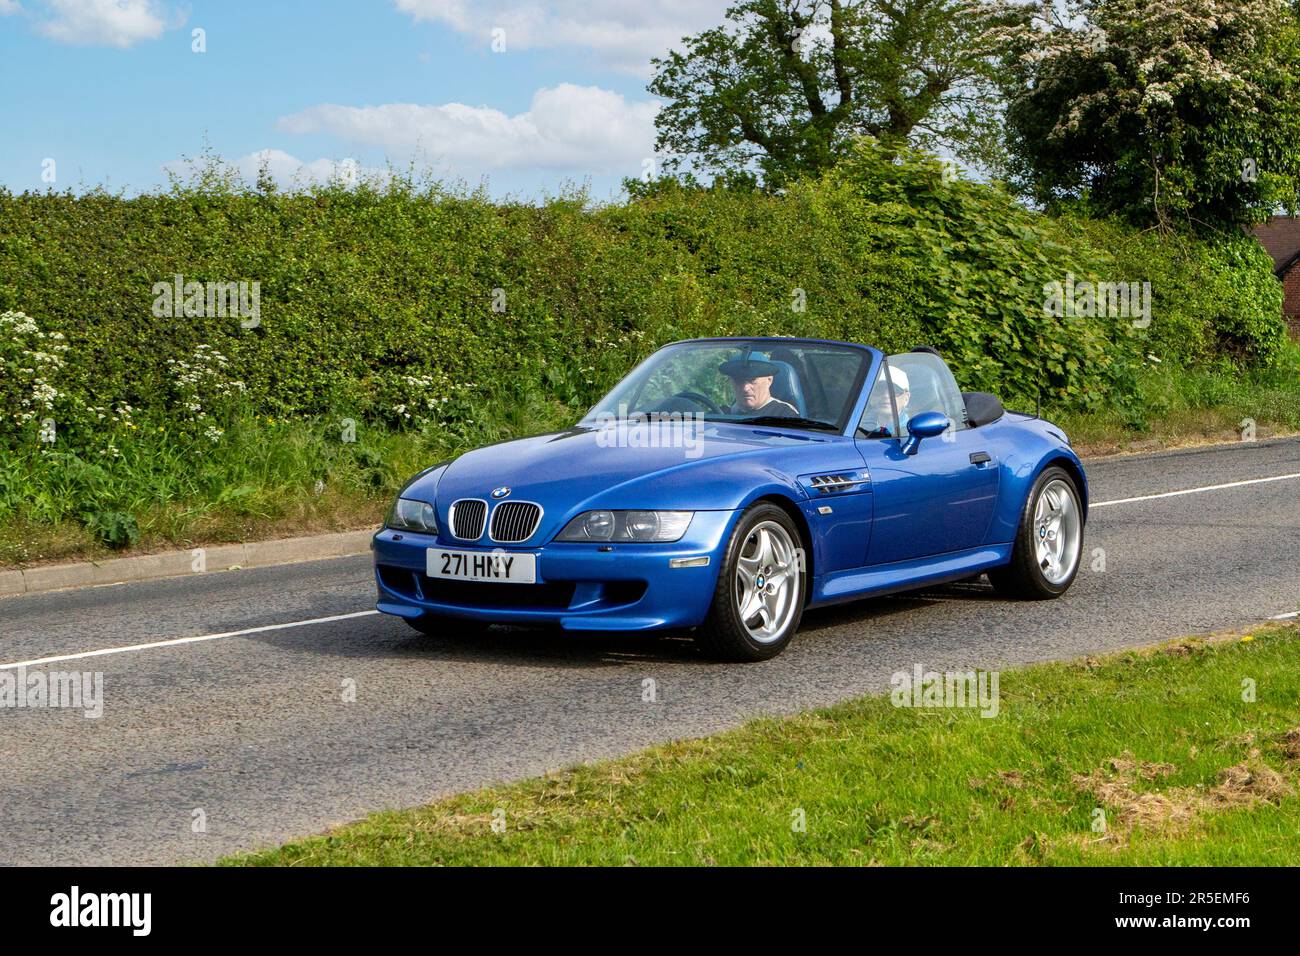 2000 BMW M Roadster 3201cc Classic vintage car, Yesteryear motors en route to Capesthorne Hall Vintage Collectors car show, Cheshire, UKlassic vintag Stock Photo